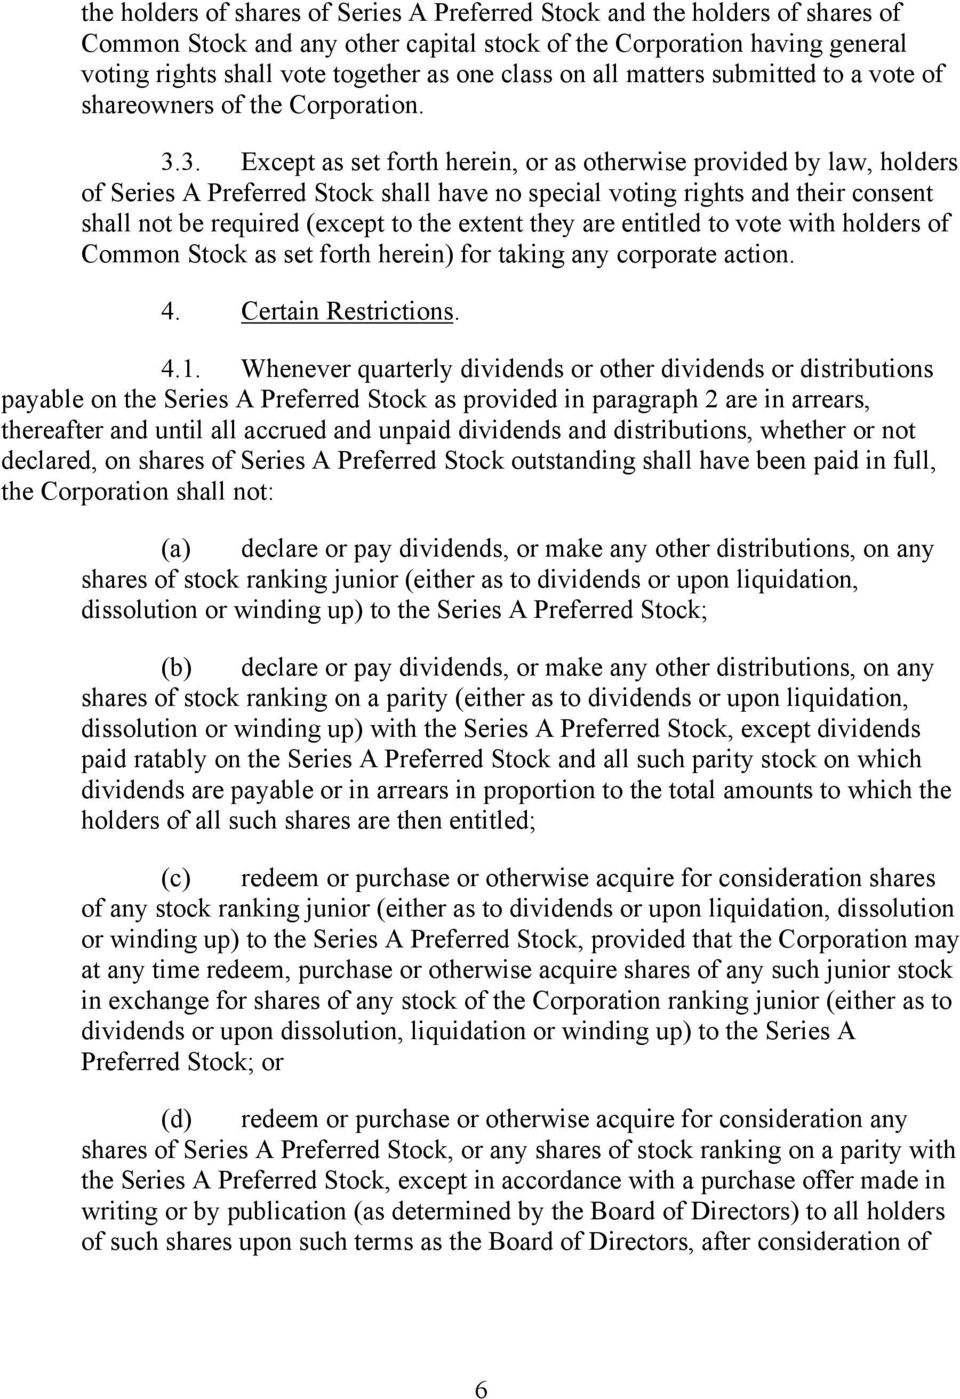 3. Except as set forth herein, or as otherwise provided by law, holders of Series A Preferred Stock shall have no special voting rights and their consent shall not be required (except to the extent